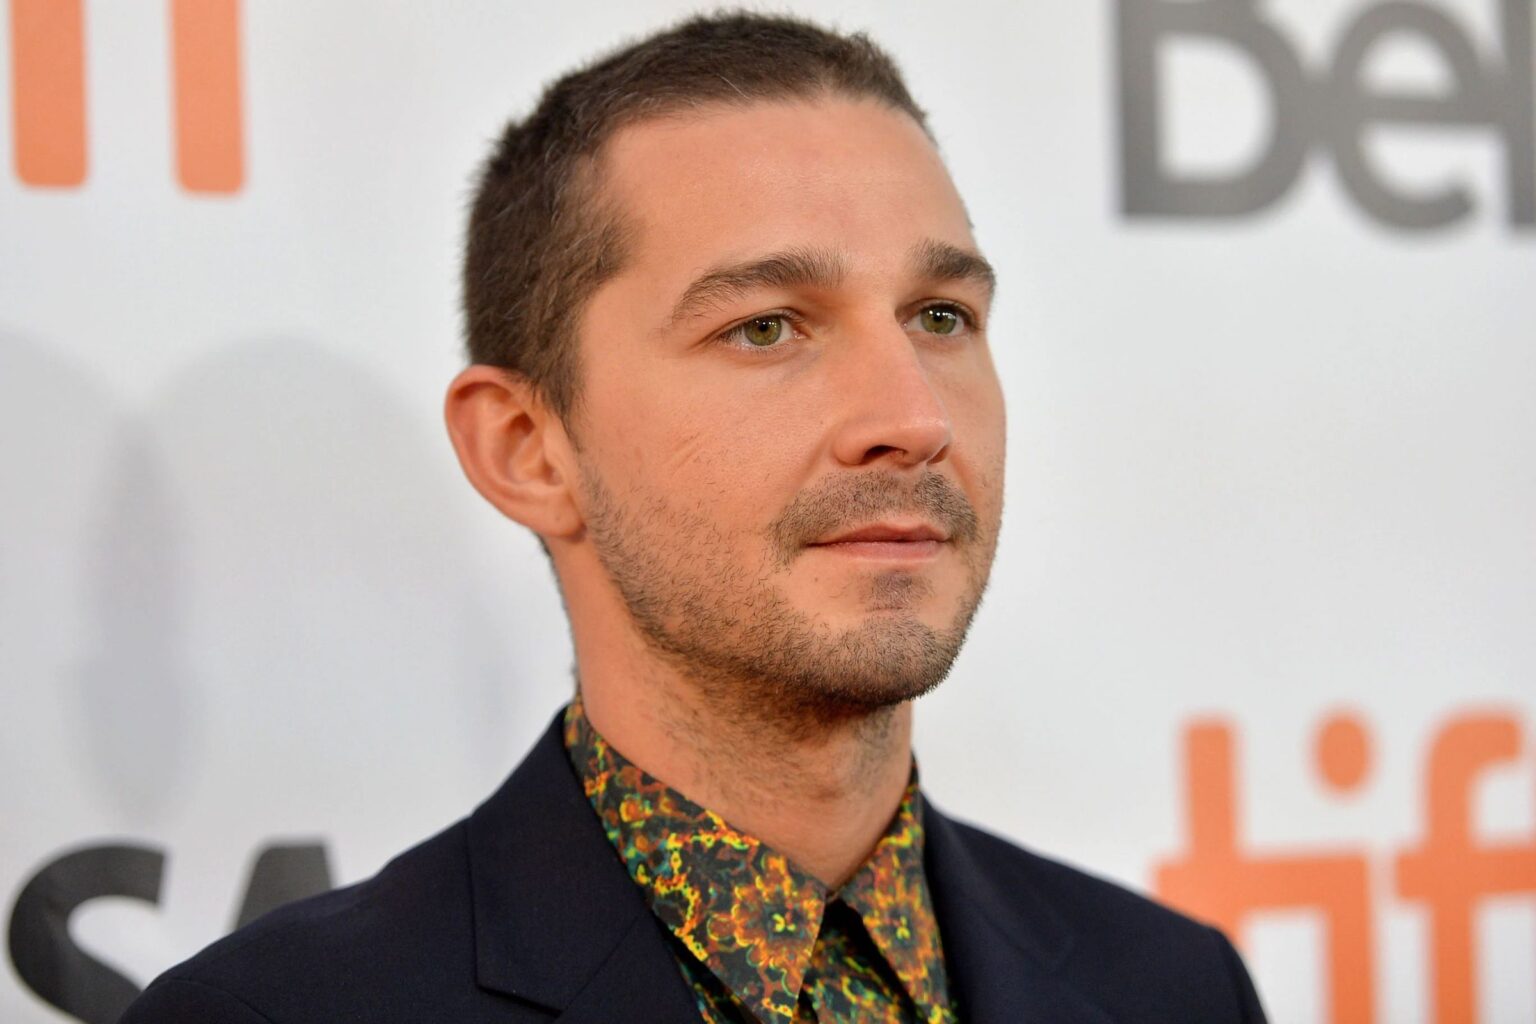 Can Shia LaBeouf make a comeback with 'Transformers 7' despite his recent scandal? Read ex-girlfriend FKA Twigs' allegations towards the A-list actor.